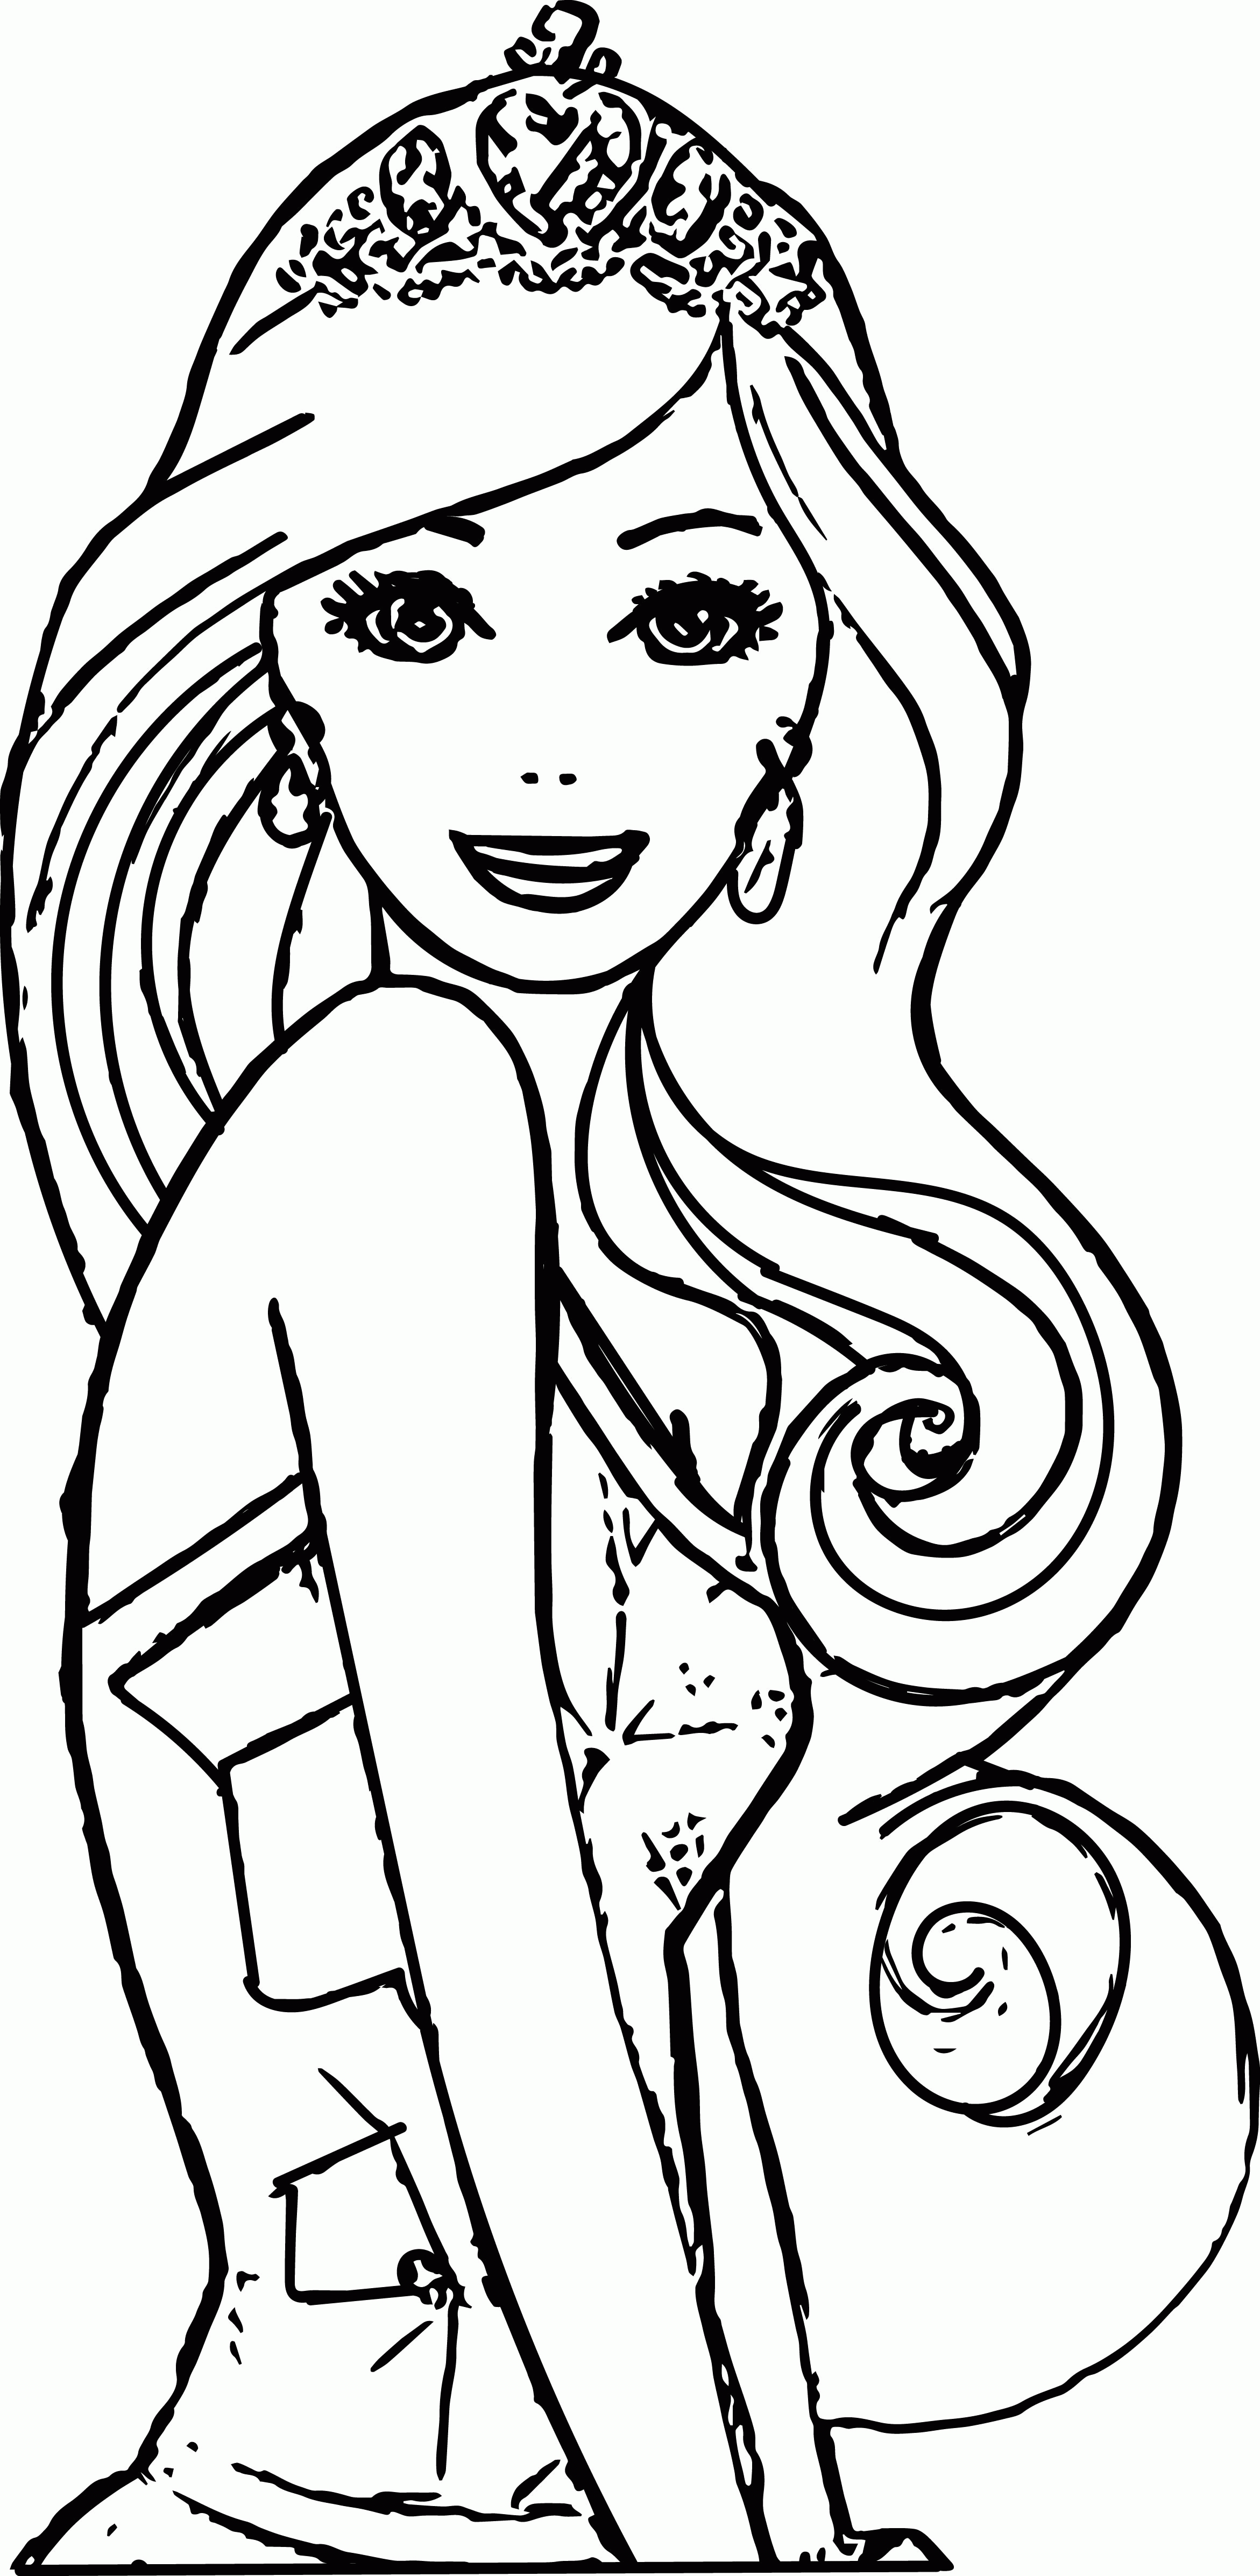 Barbie Face Coloring Page 01 | Wecoloringpage - Coloring Home